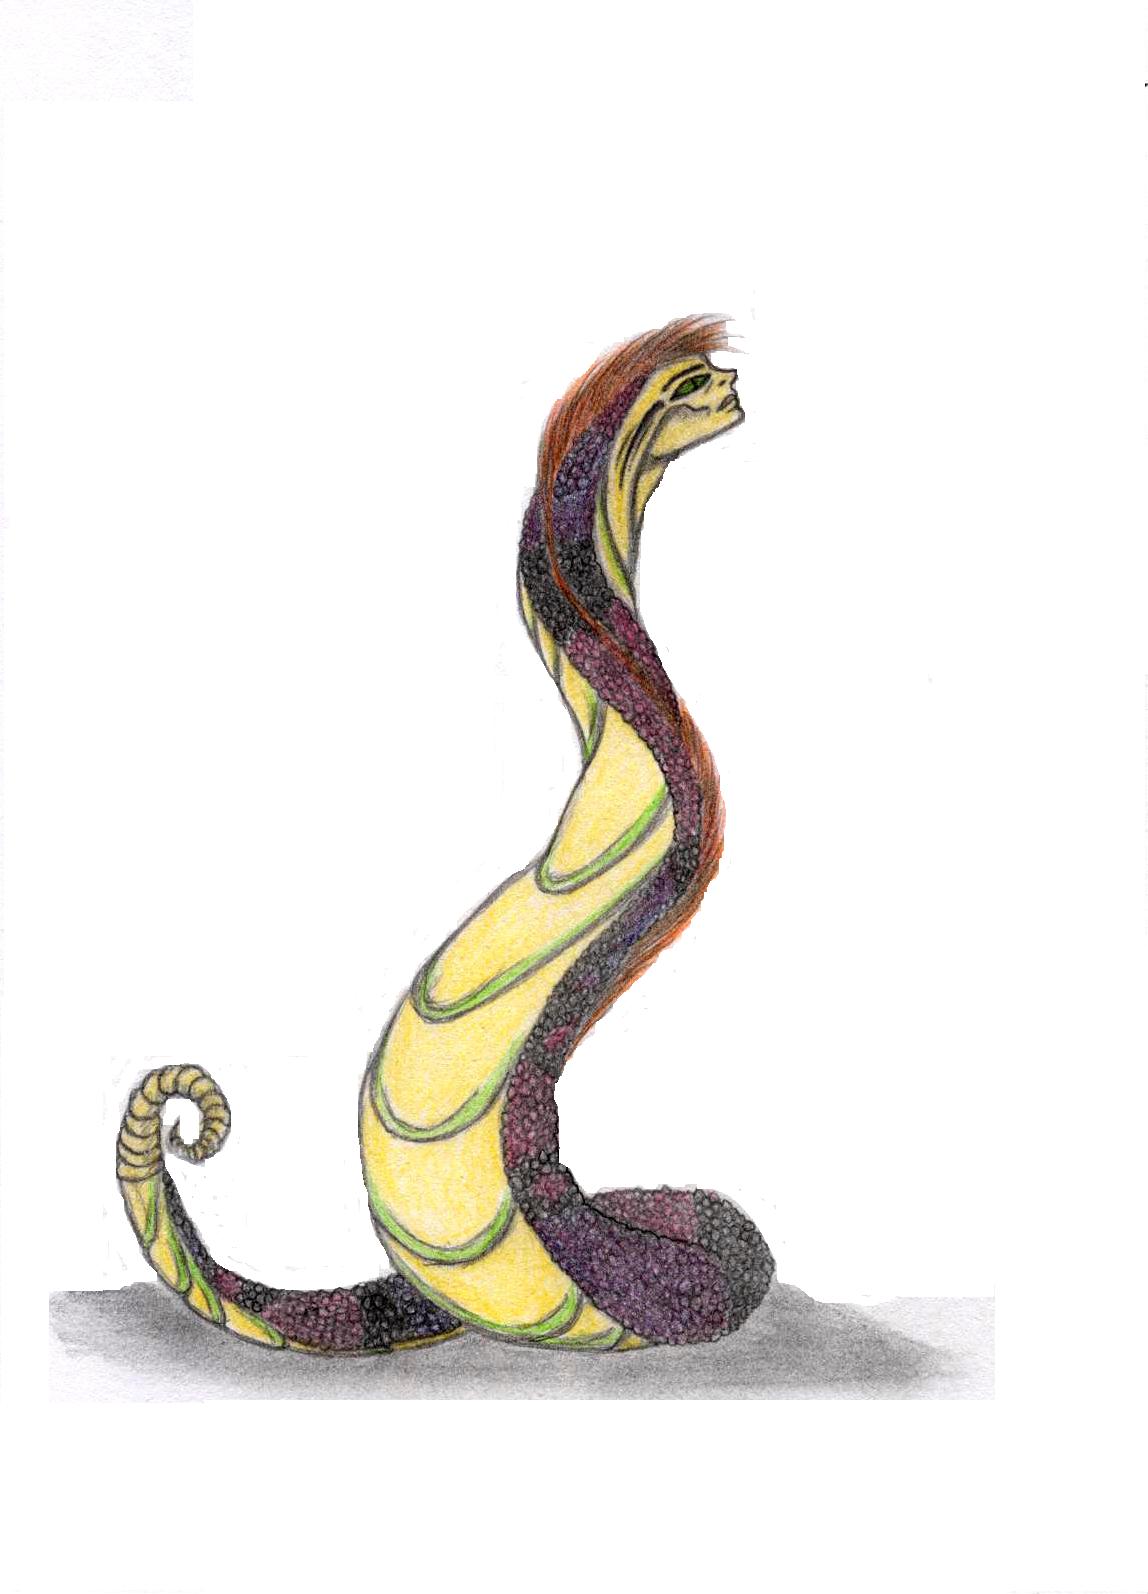 Snake Creature by Ran_The_Hyena